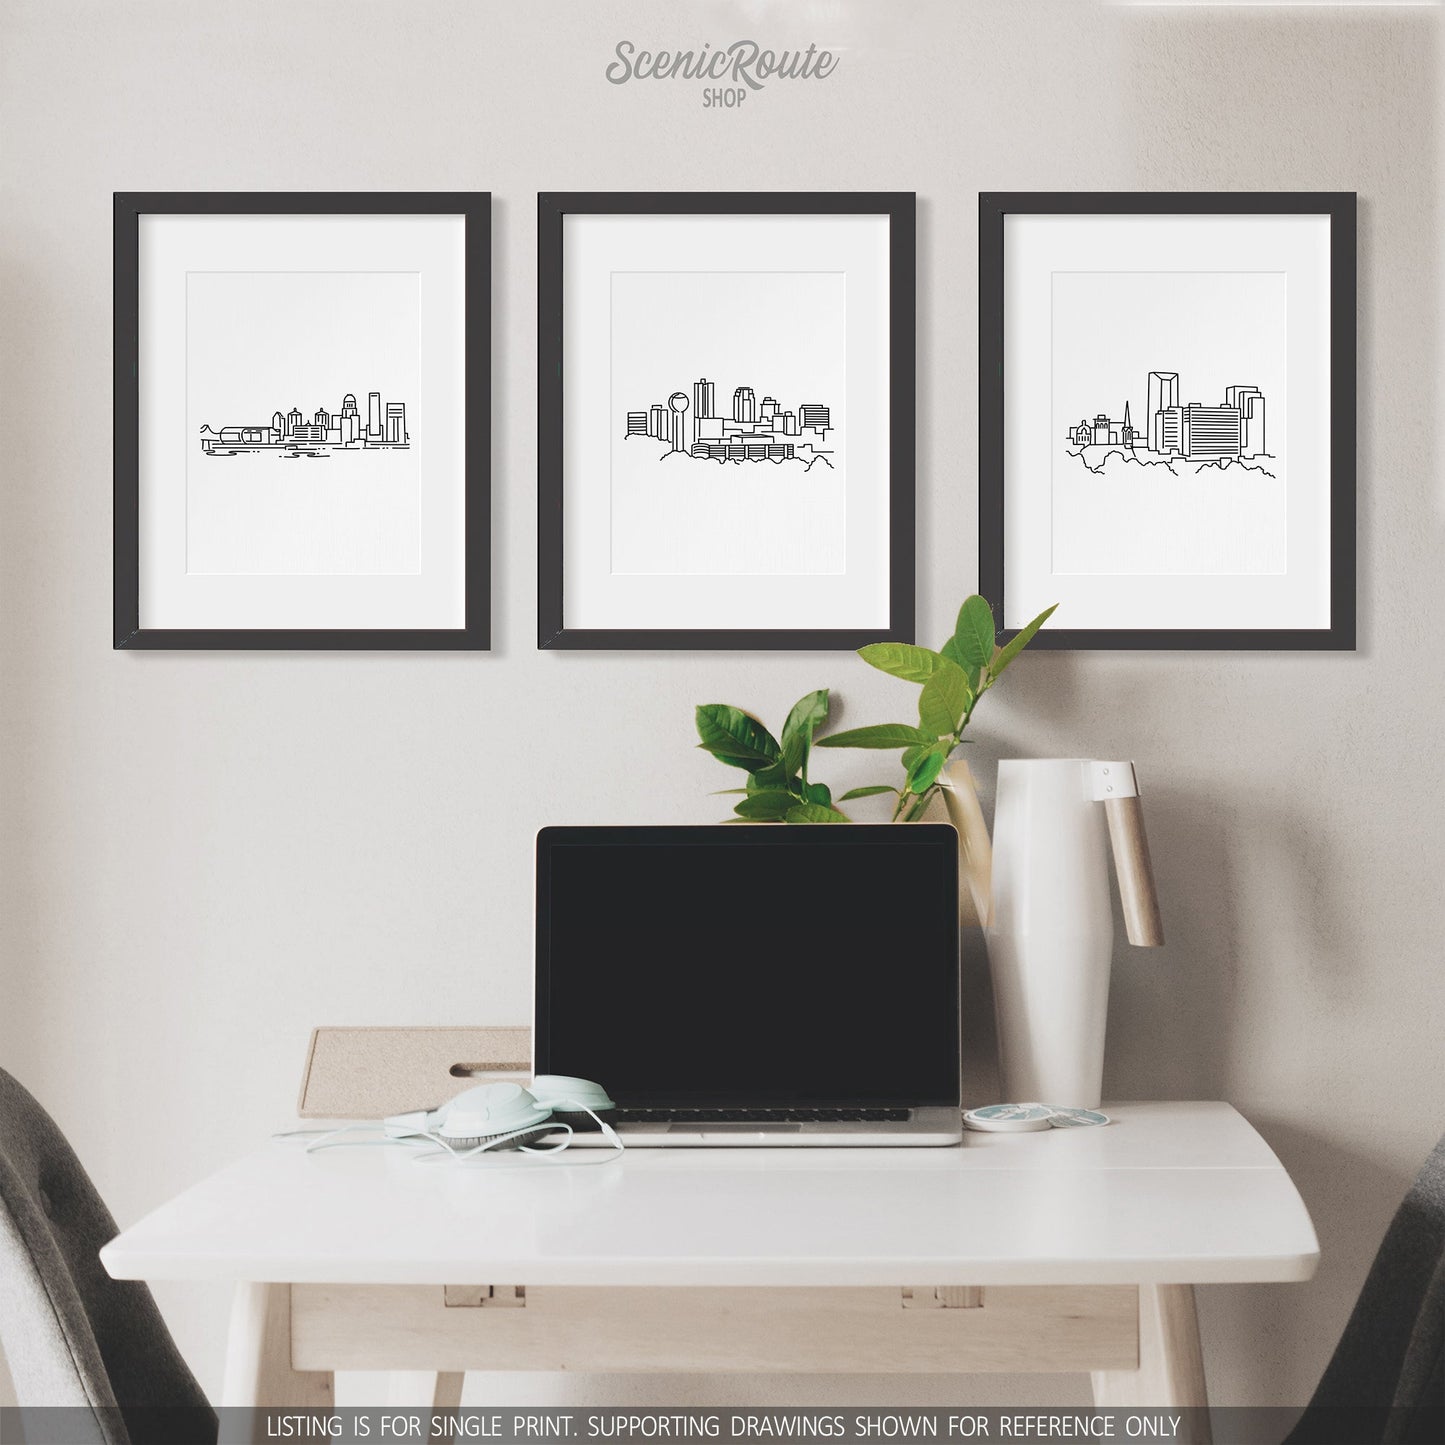 A group of three framed drawings on a wall above a desk with a laptop. The line art drawings include the Louisville Skyline, Knoxville Skyline, and Lexington Skyline